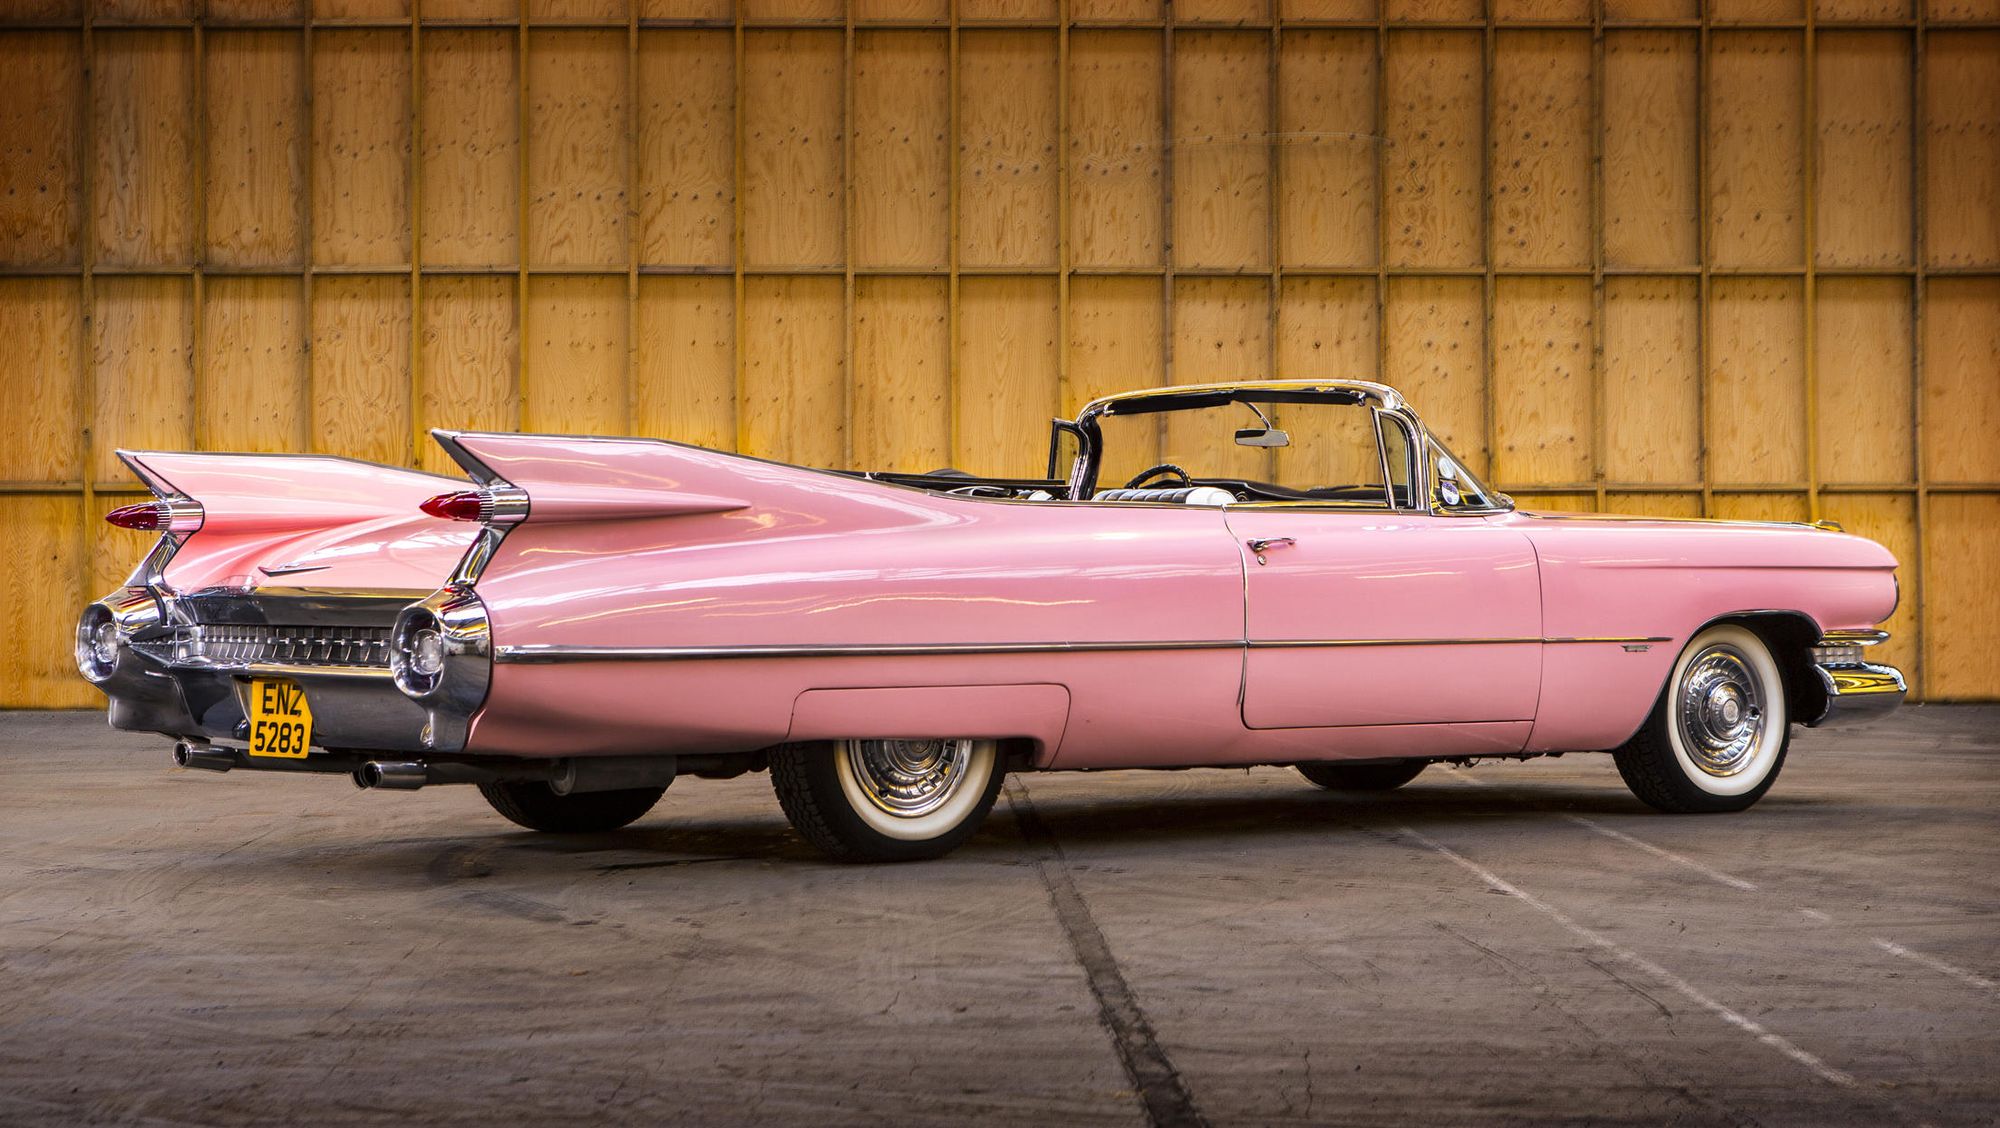 HQ Pink Cadillac Wallpapers | File 332.96Kb